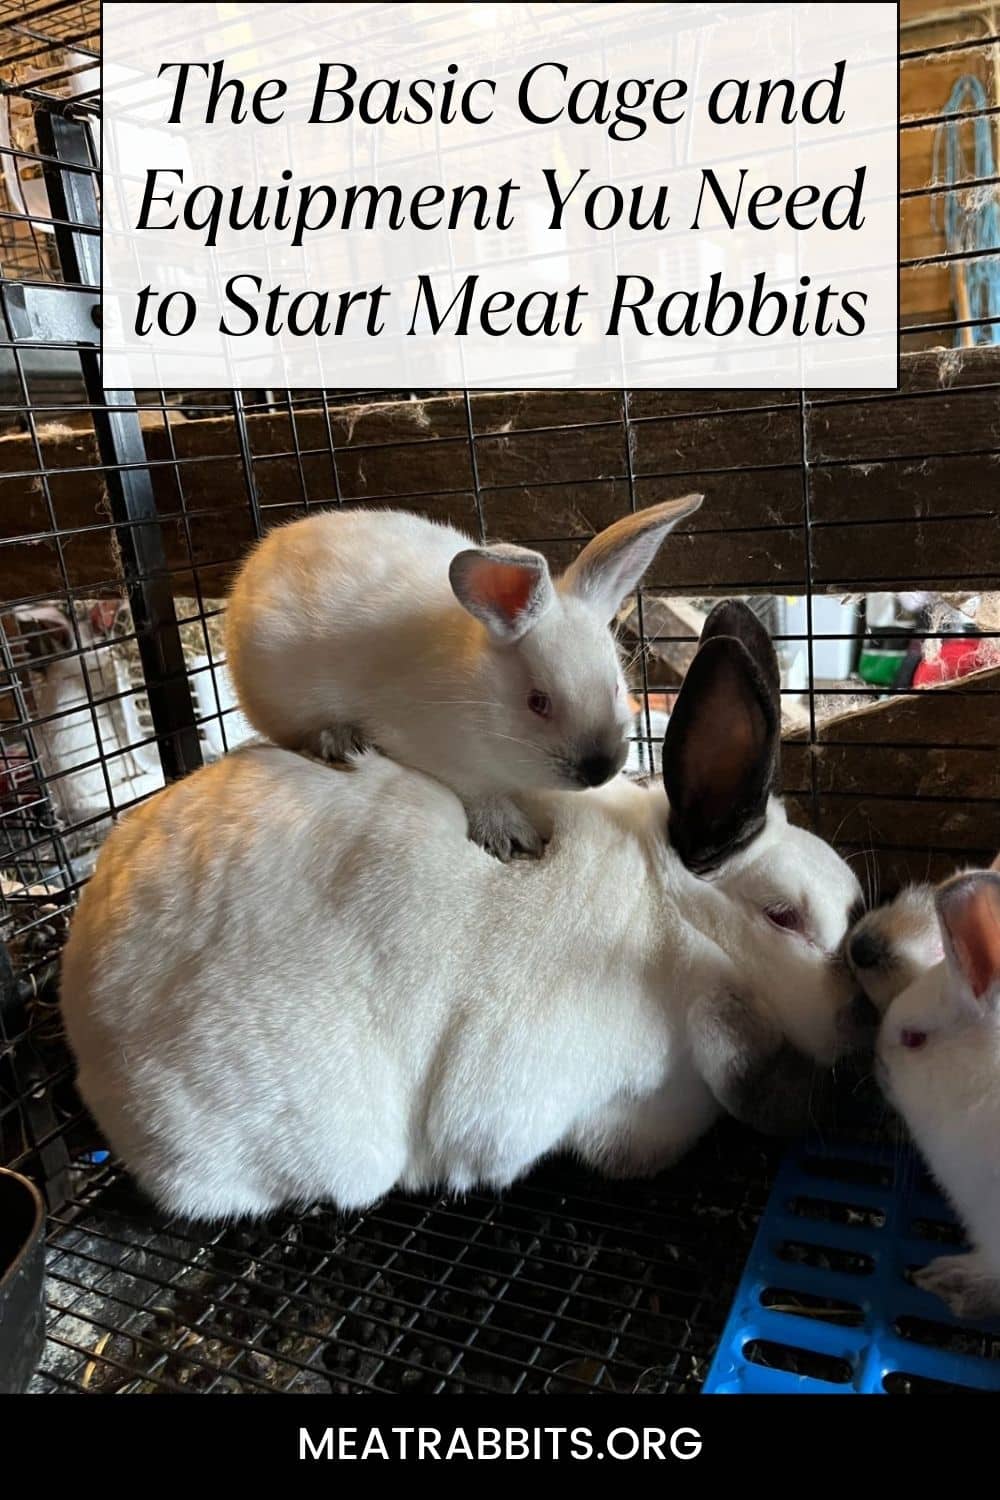 The Basic Cage and Equipment You Need to Start Meat Rabbits pinterest image.